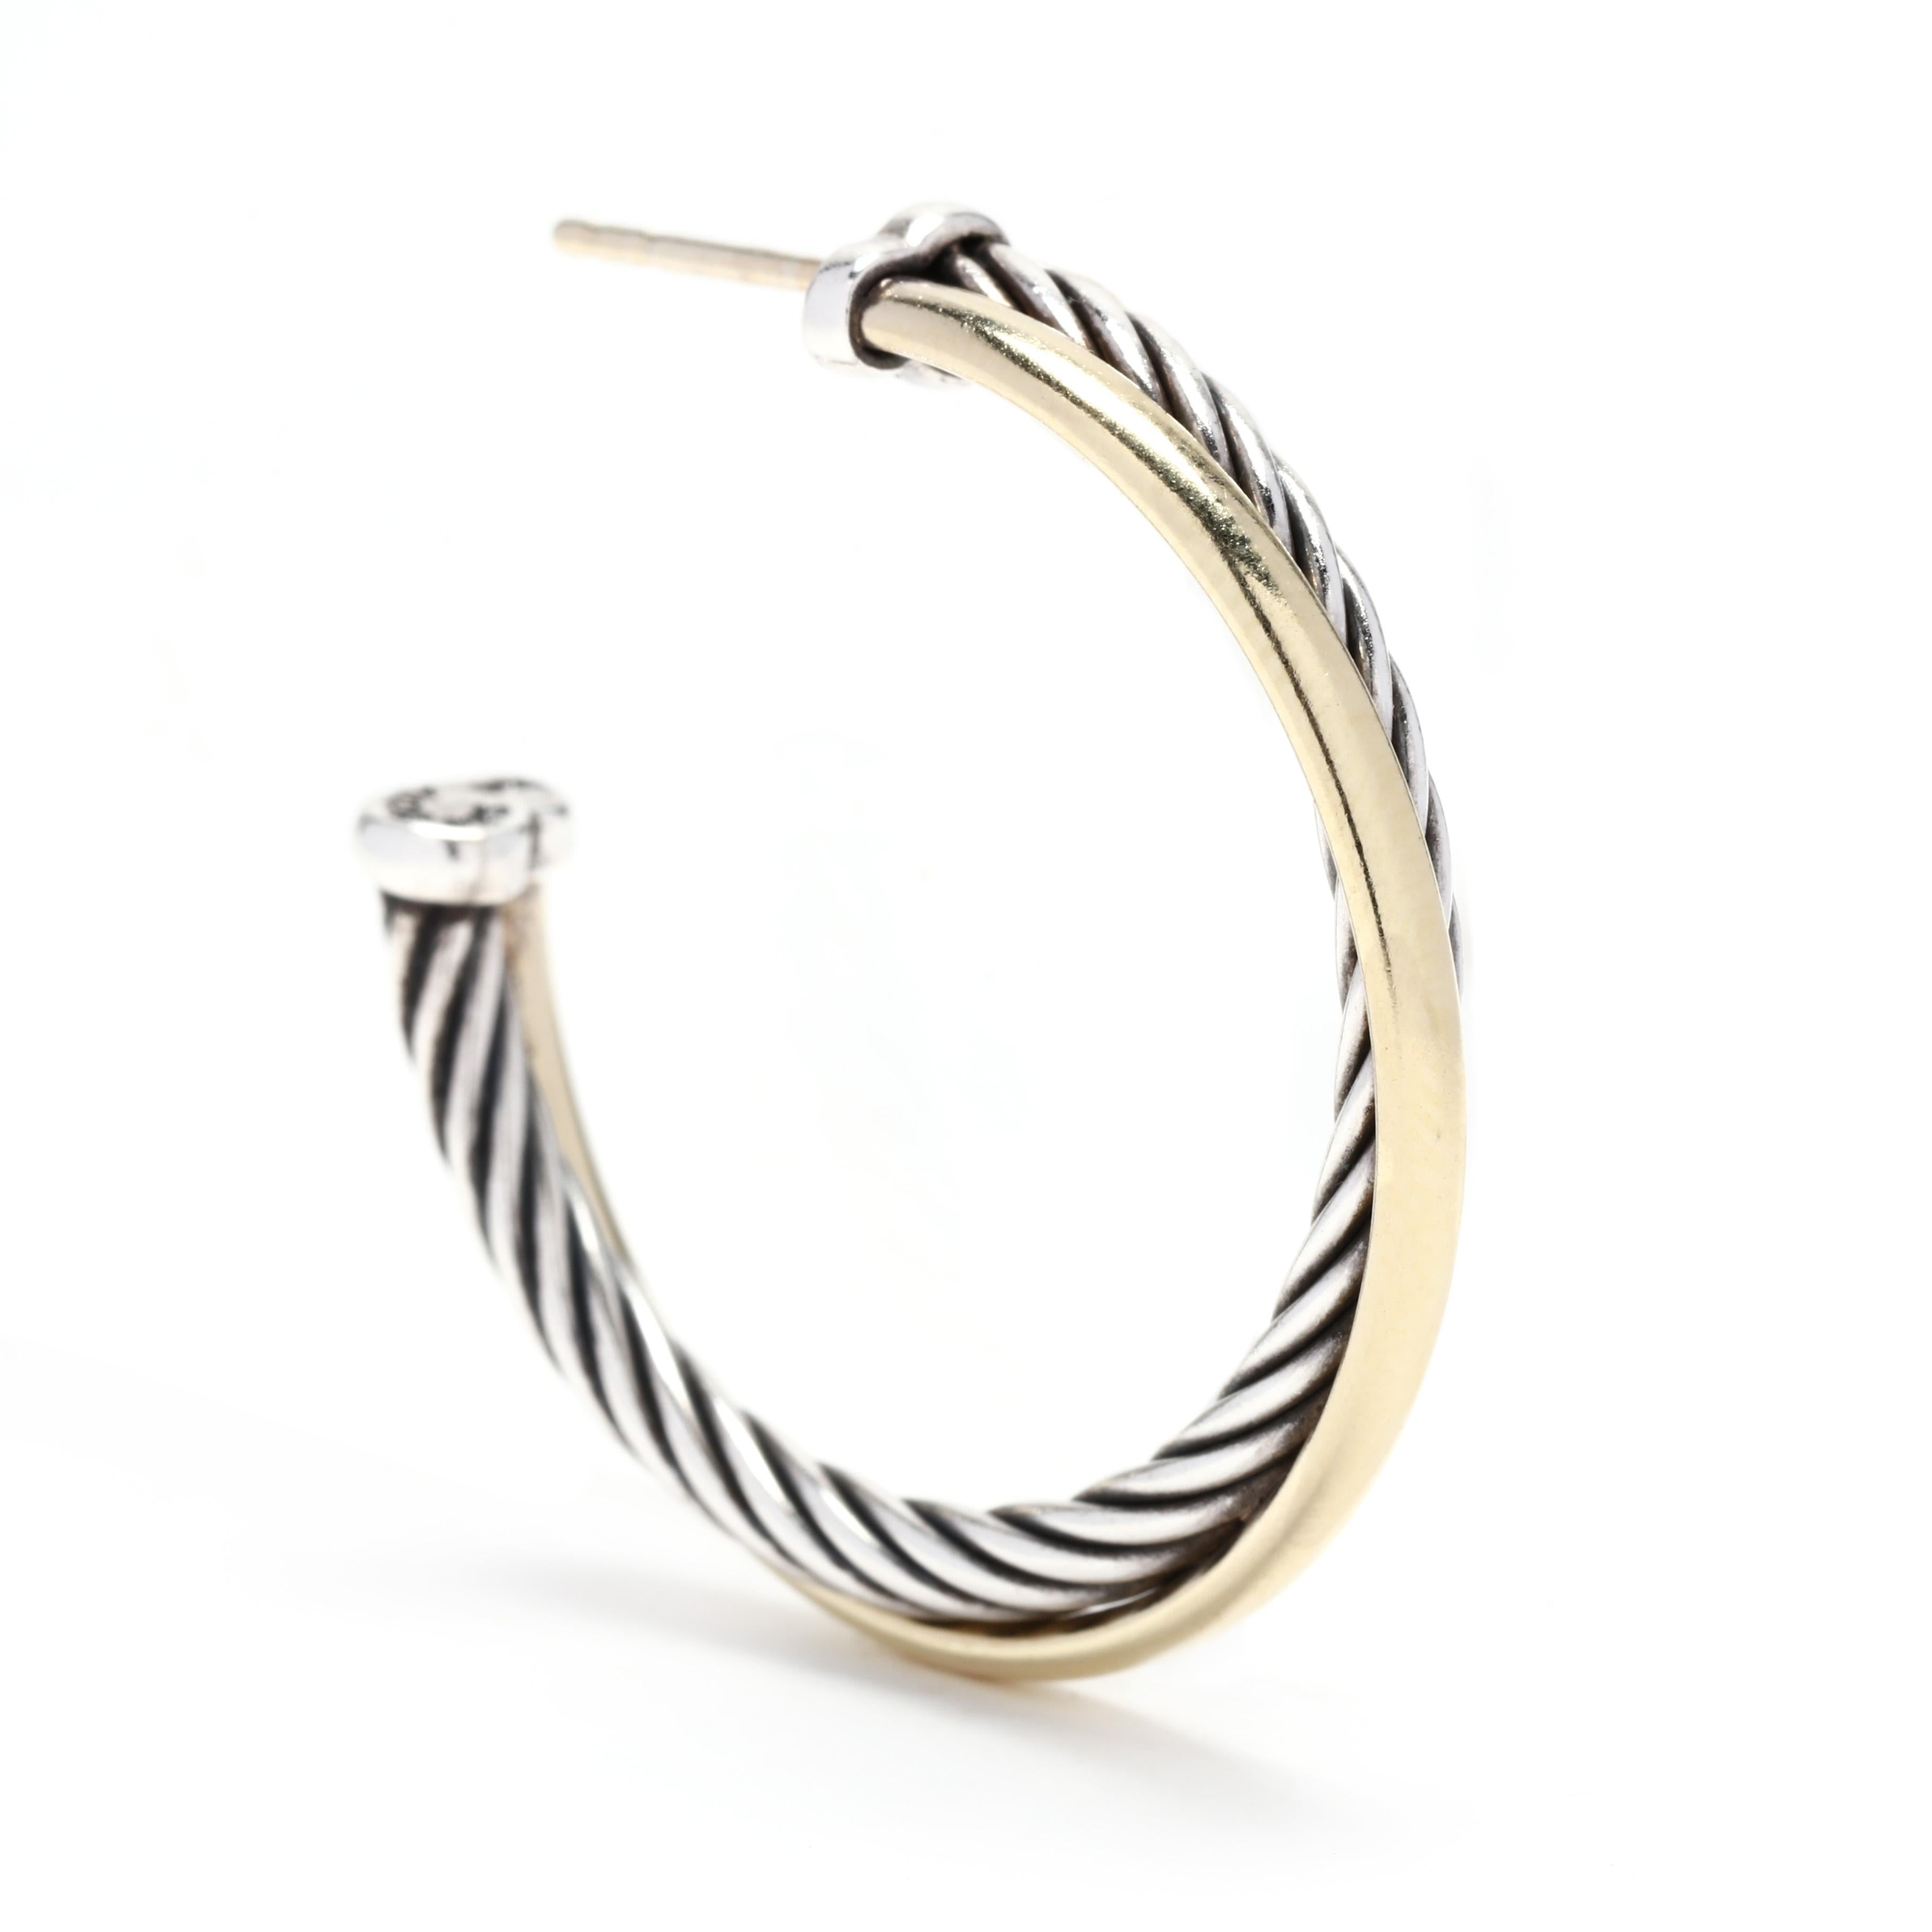 A pair of 14 karat yellow gold and sterling silver medium crossover hoop earrings by David Yurman. These earrings feature a silver cable motif hoop with a flat polished hoop that crosses over and with post and push backs.



Length: 1.25